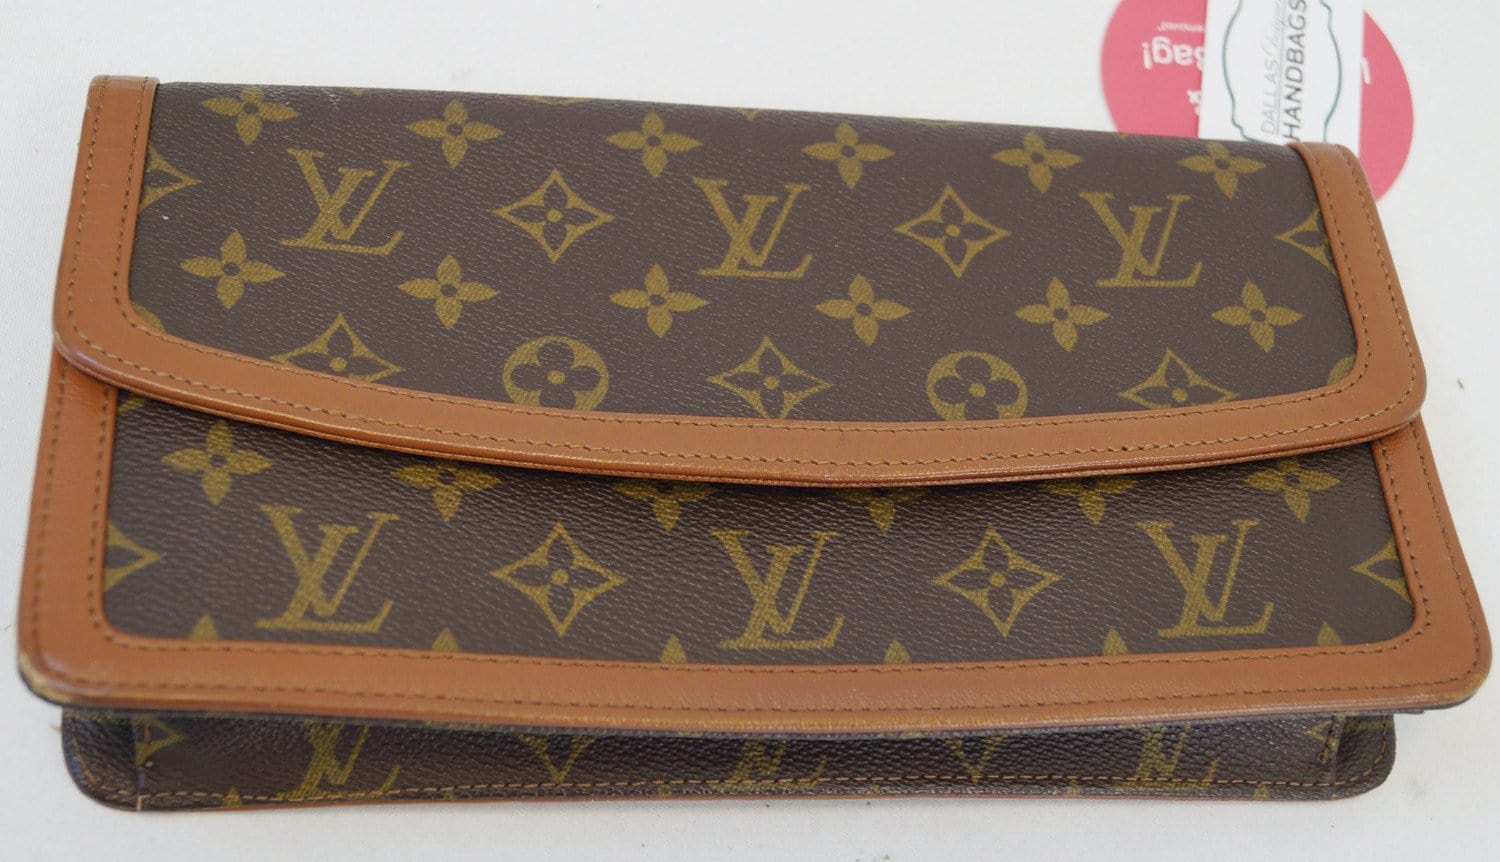 LV Pochette Dame PM Clutch Bag - With Grommets & Chain